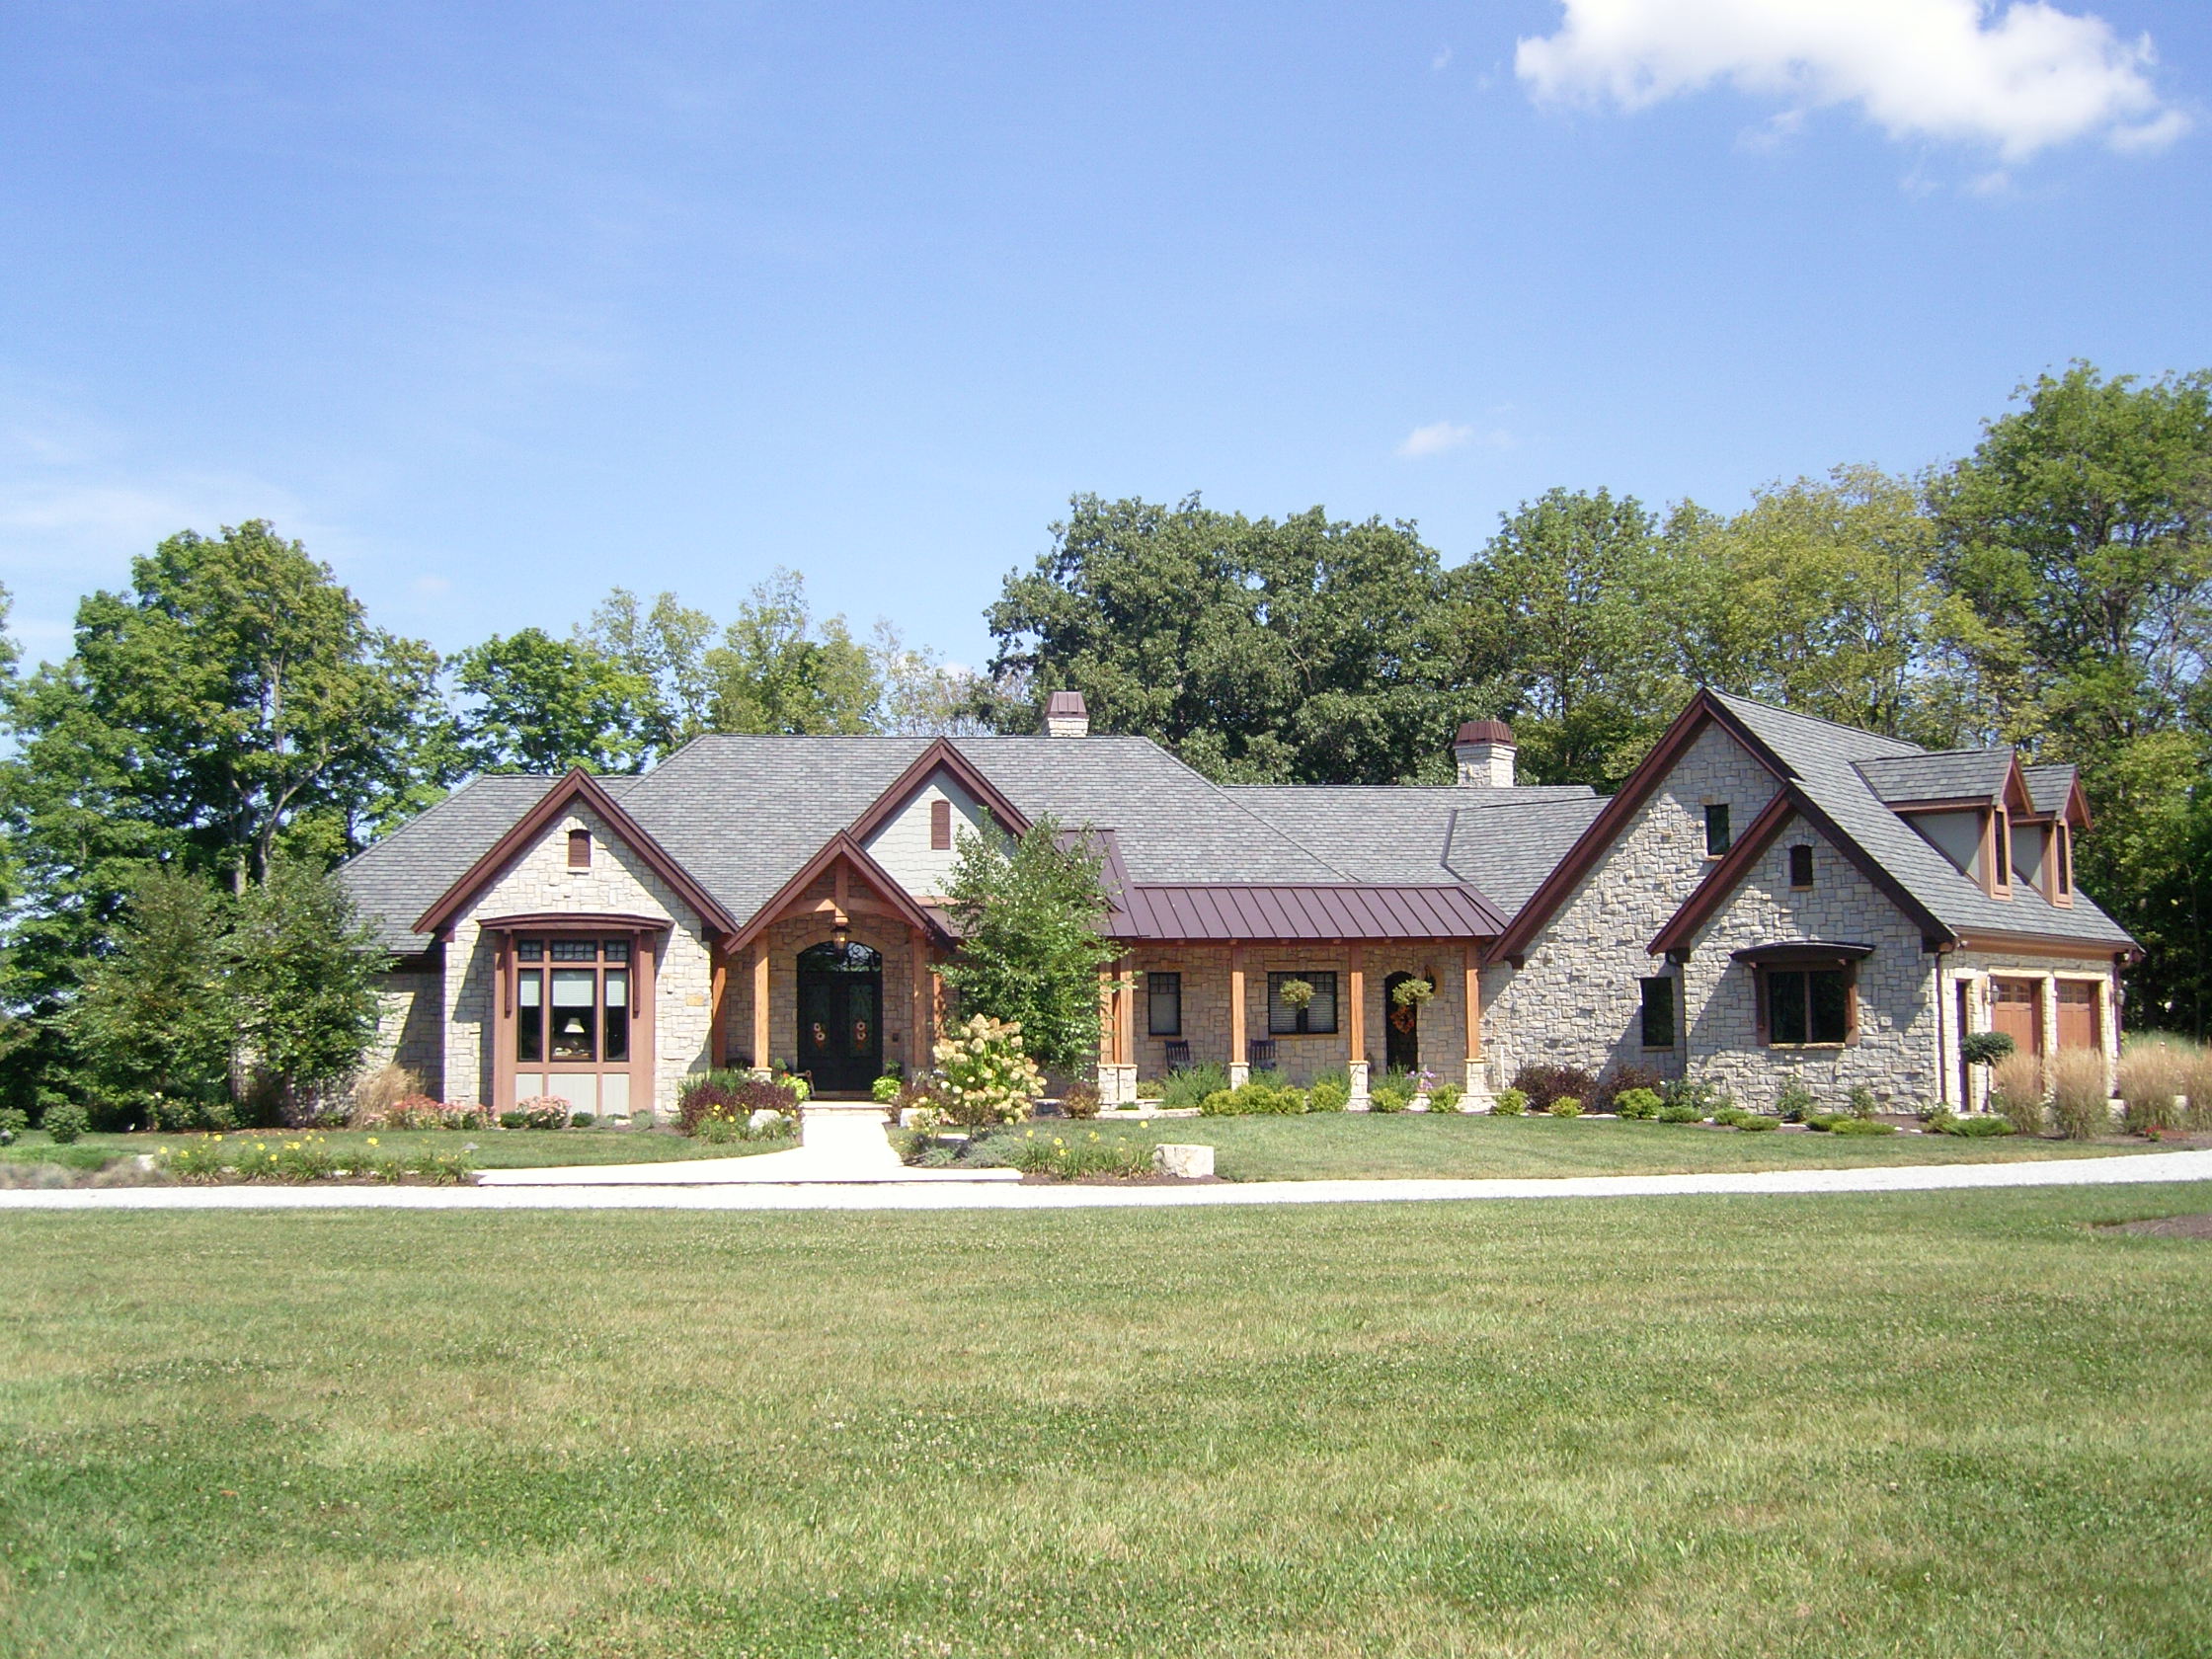  Country Estate With Carriage House - Stone Exterior